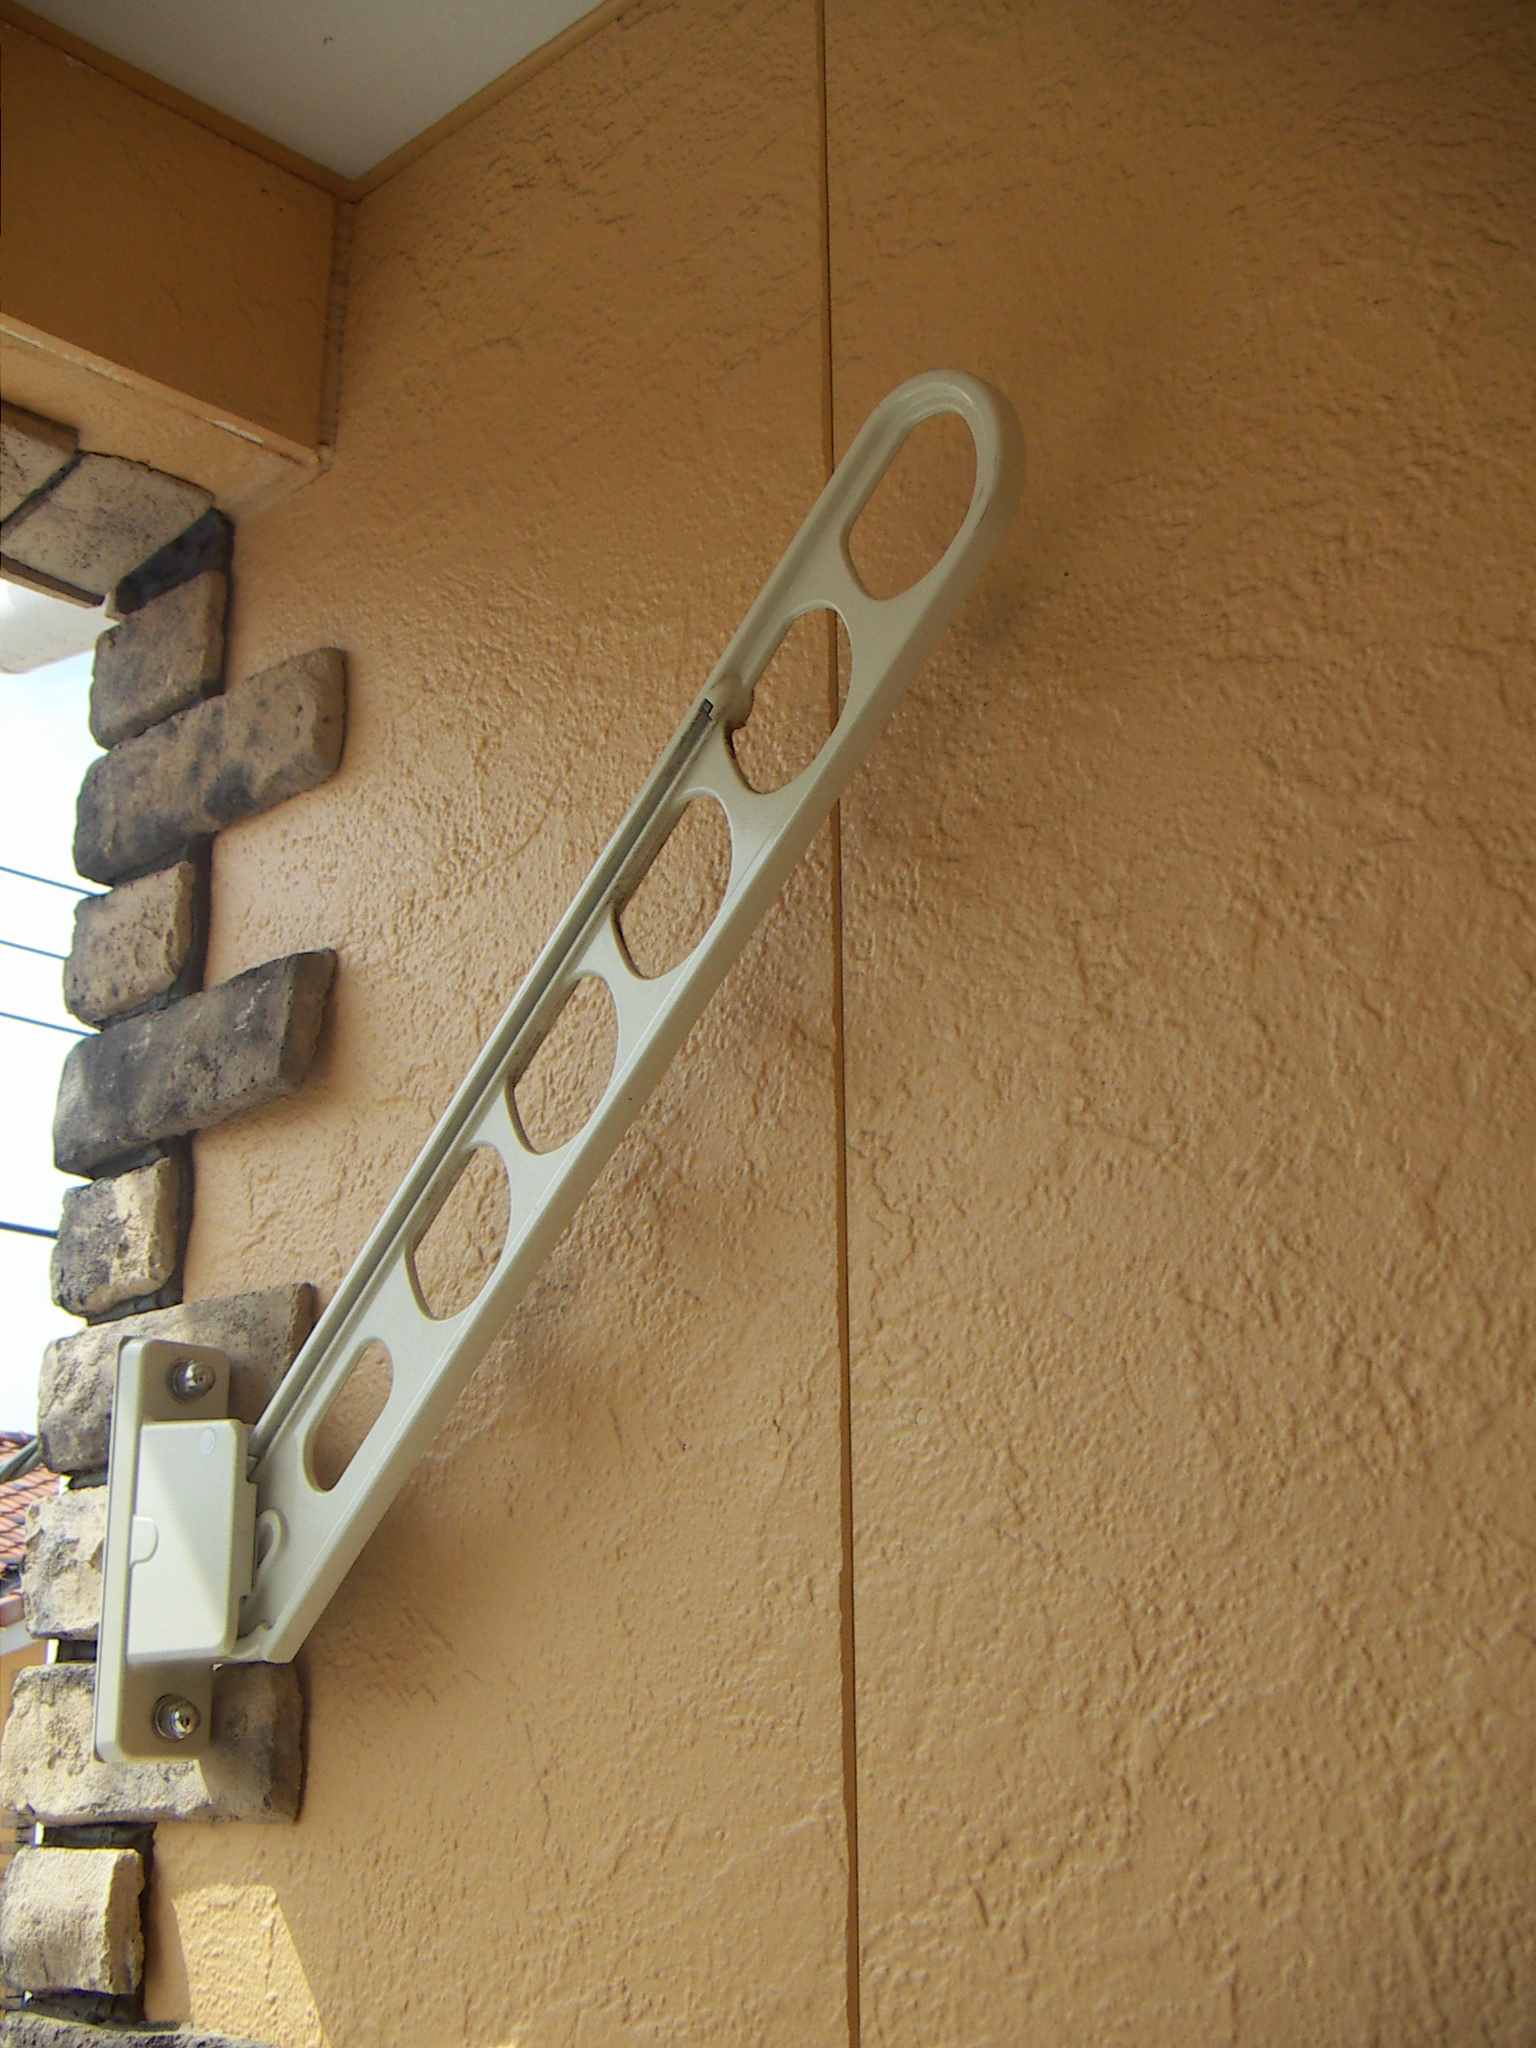 Other Equipment. It is a clothes hanger that is installed on the balcony